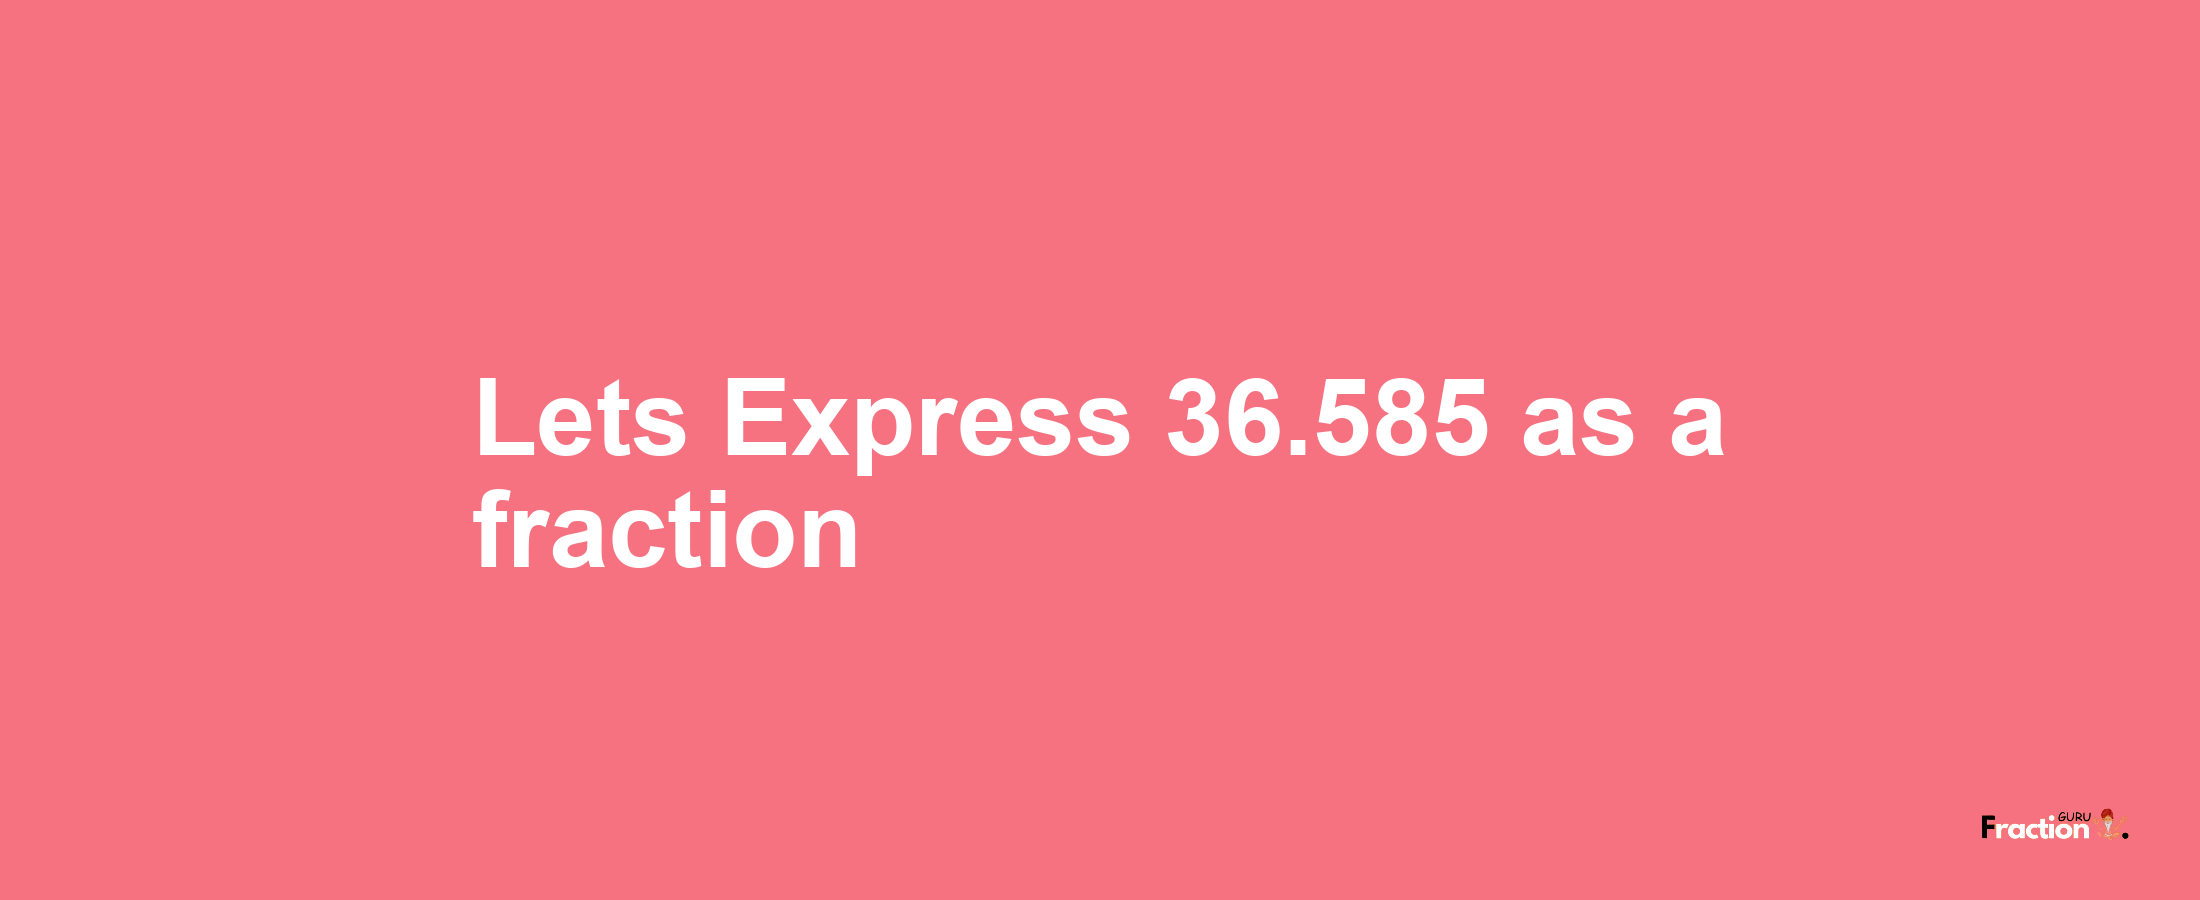 Lets Express 36.585 as afraction